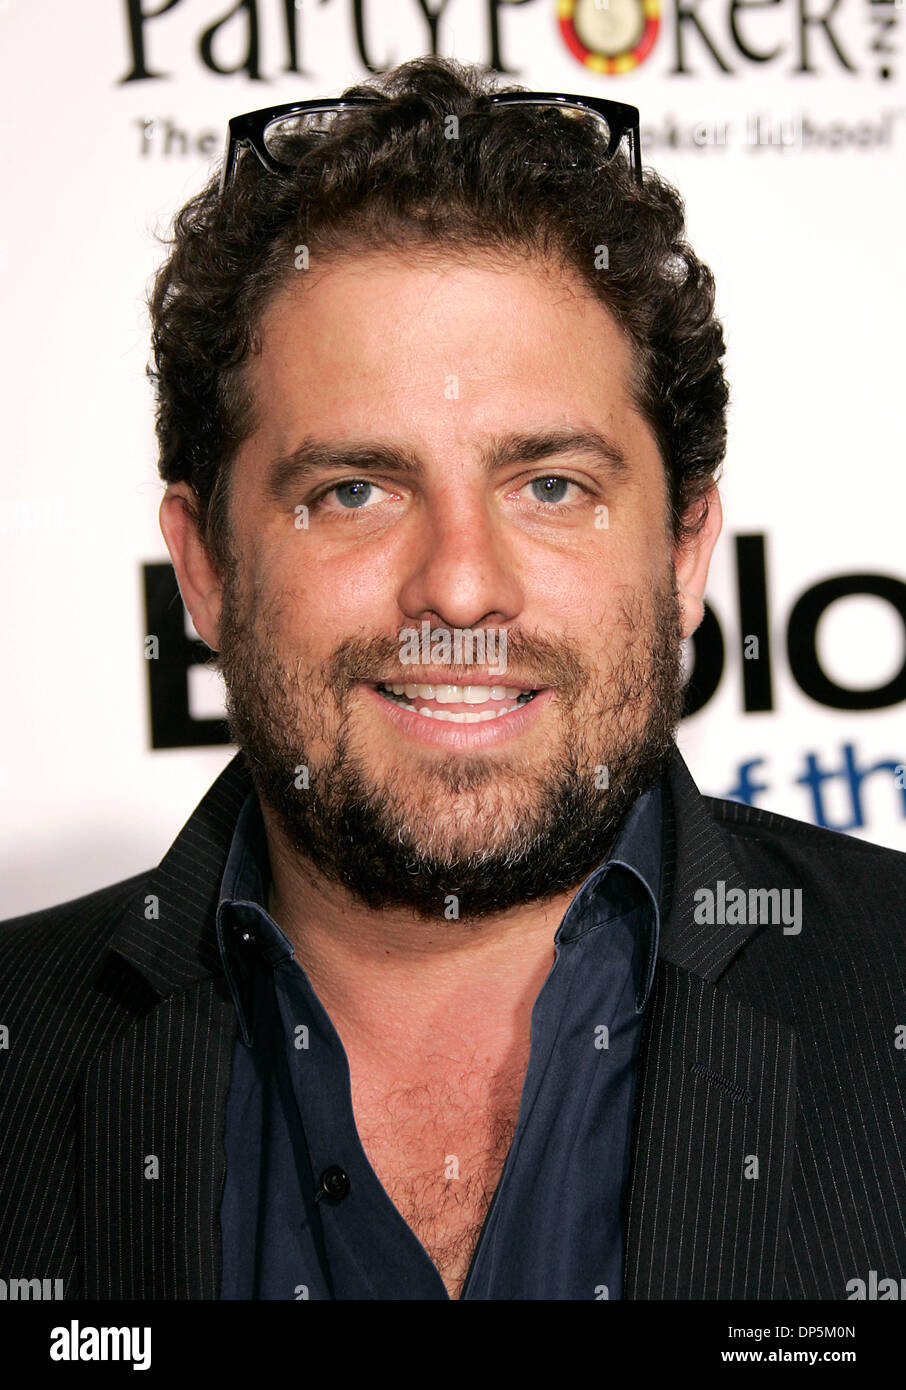 Sep 19, 2006; Hollywood, California, USA; Director BRETT RATNER at the 'Employee Of The Month' World Premiere held at the Mann Chinese Theatre. Mandatory Credit: Photo by Lisa O'Connor/ZUMA Press. (©) Copyright 2006 by Lisa O'Connor Stock Photo